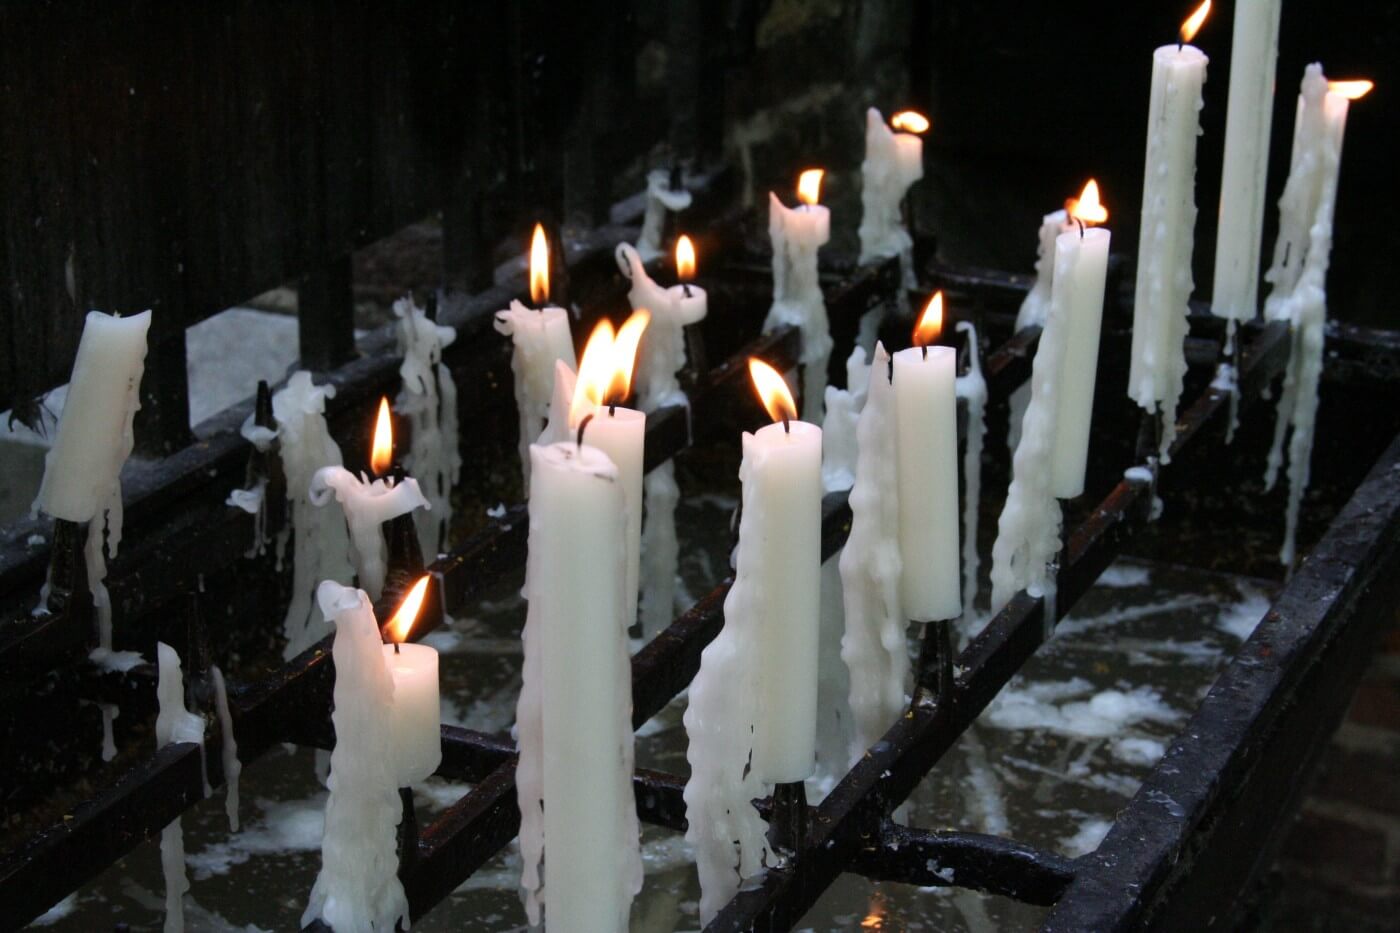 A group of candles lit

Description automatically generated with low confidence